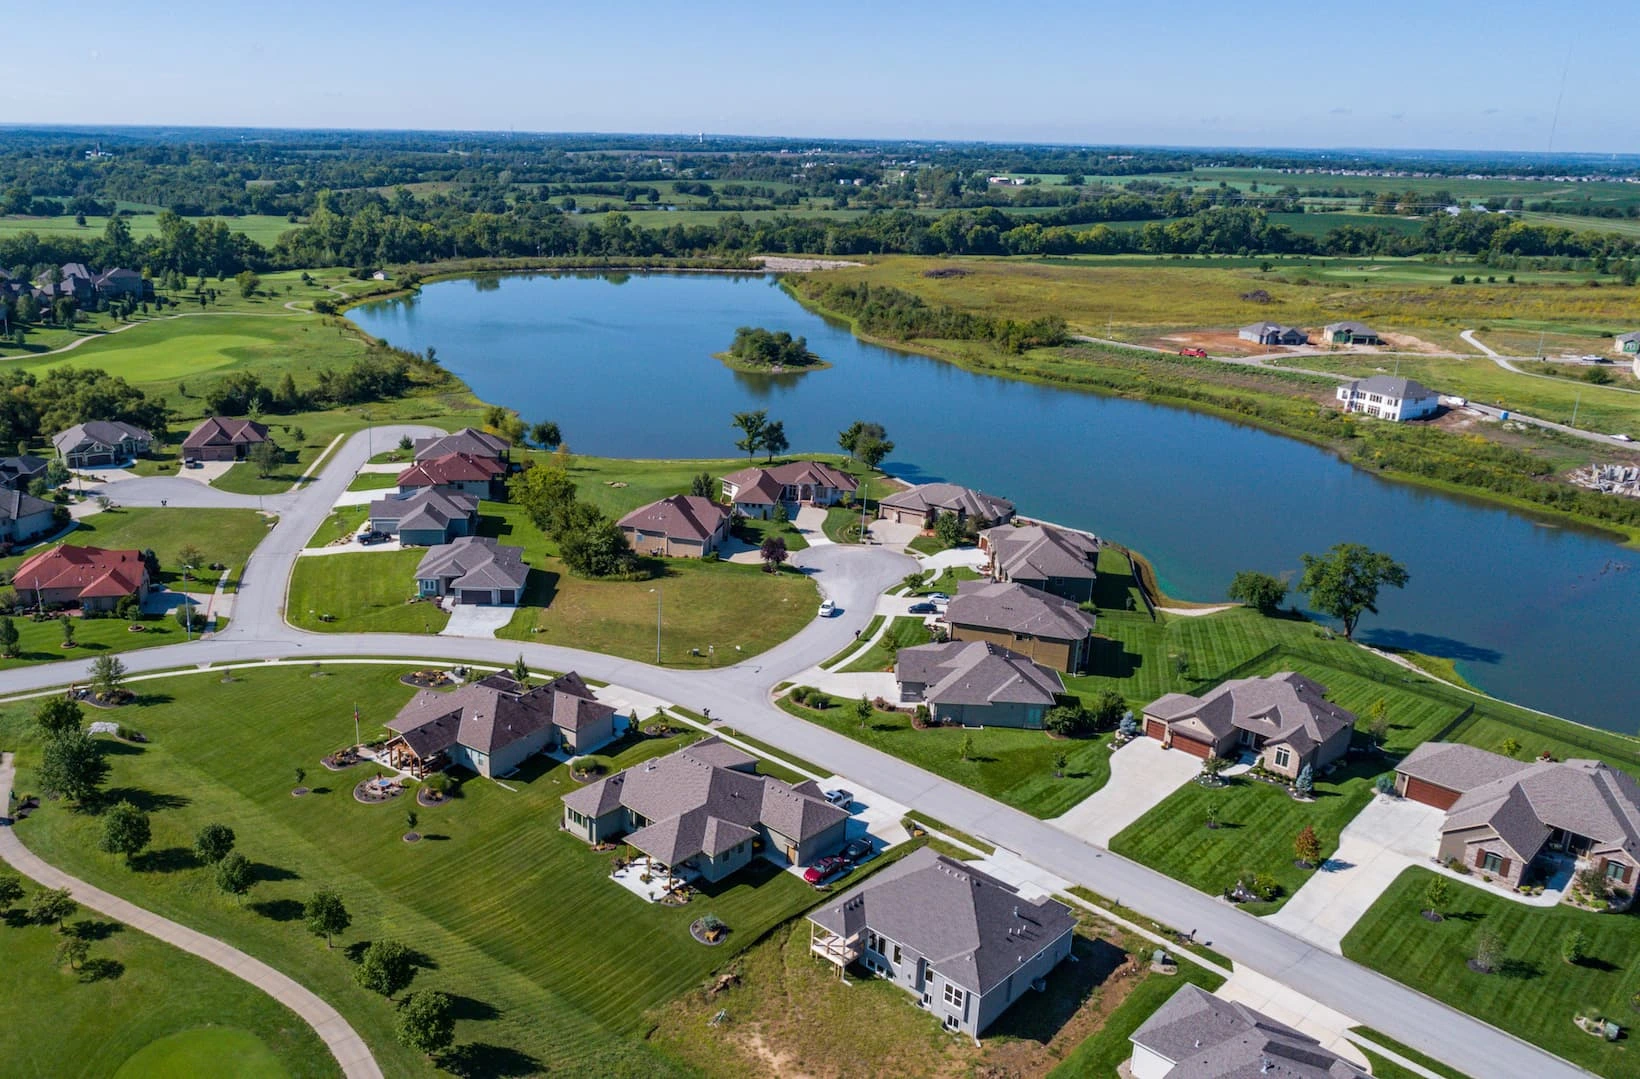 An aerial view of houses in The Communities at Falcon Lakes.